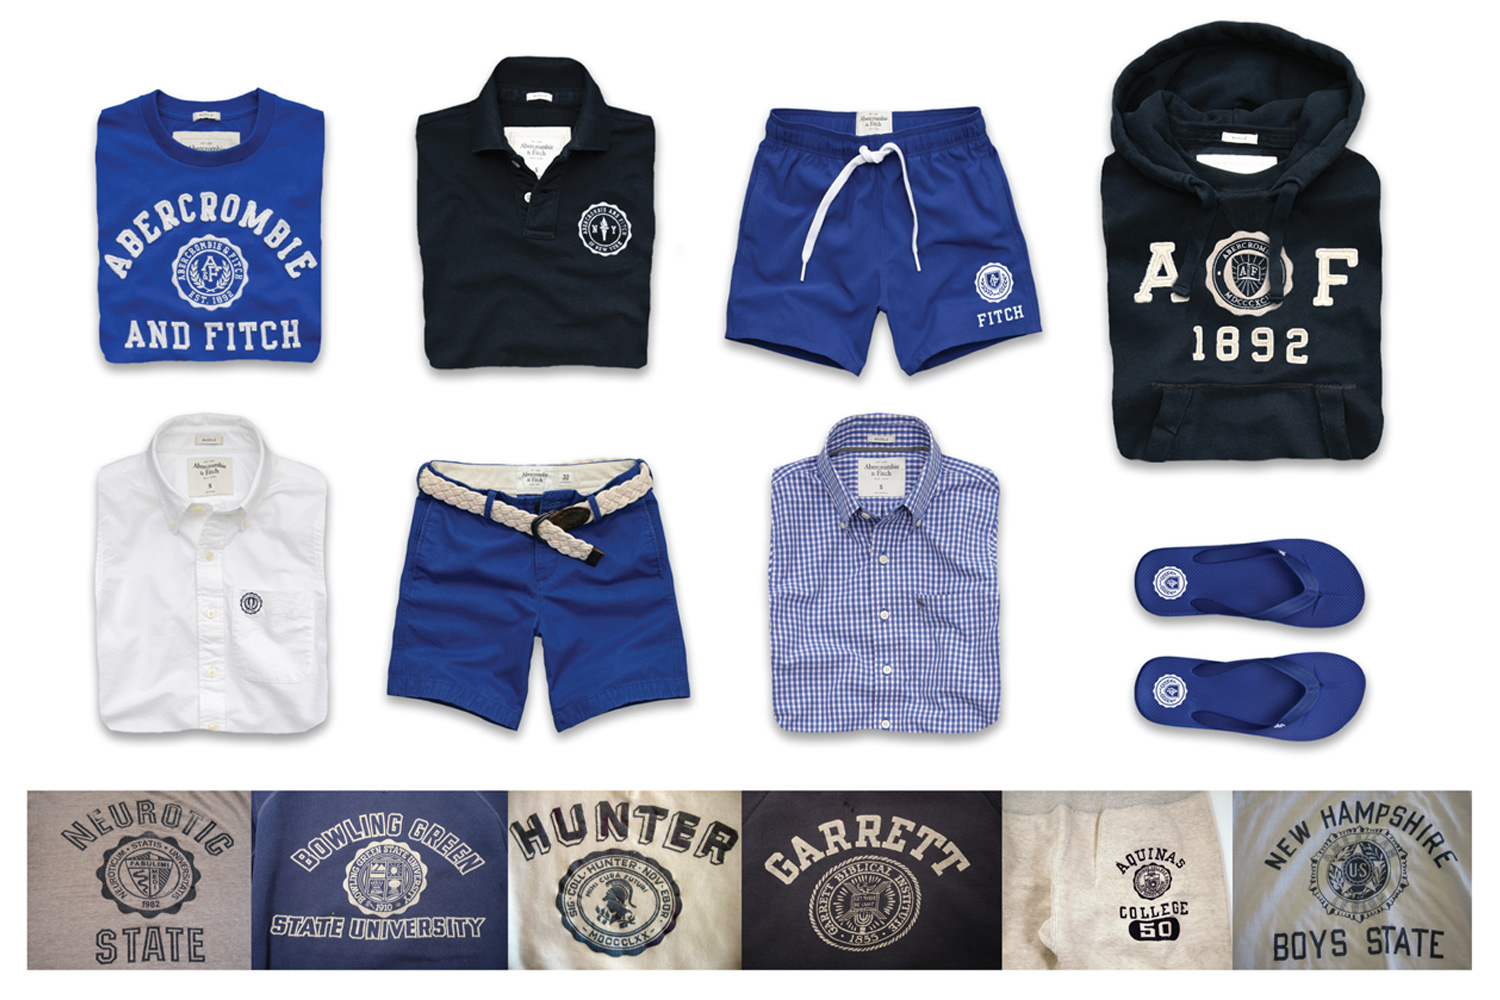 ABERCROMBIE_and_FITCH_MENS_fashion_crests.jpg